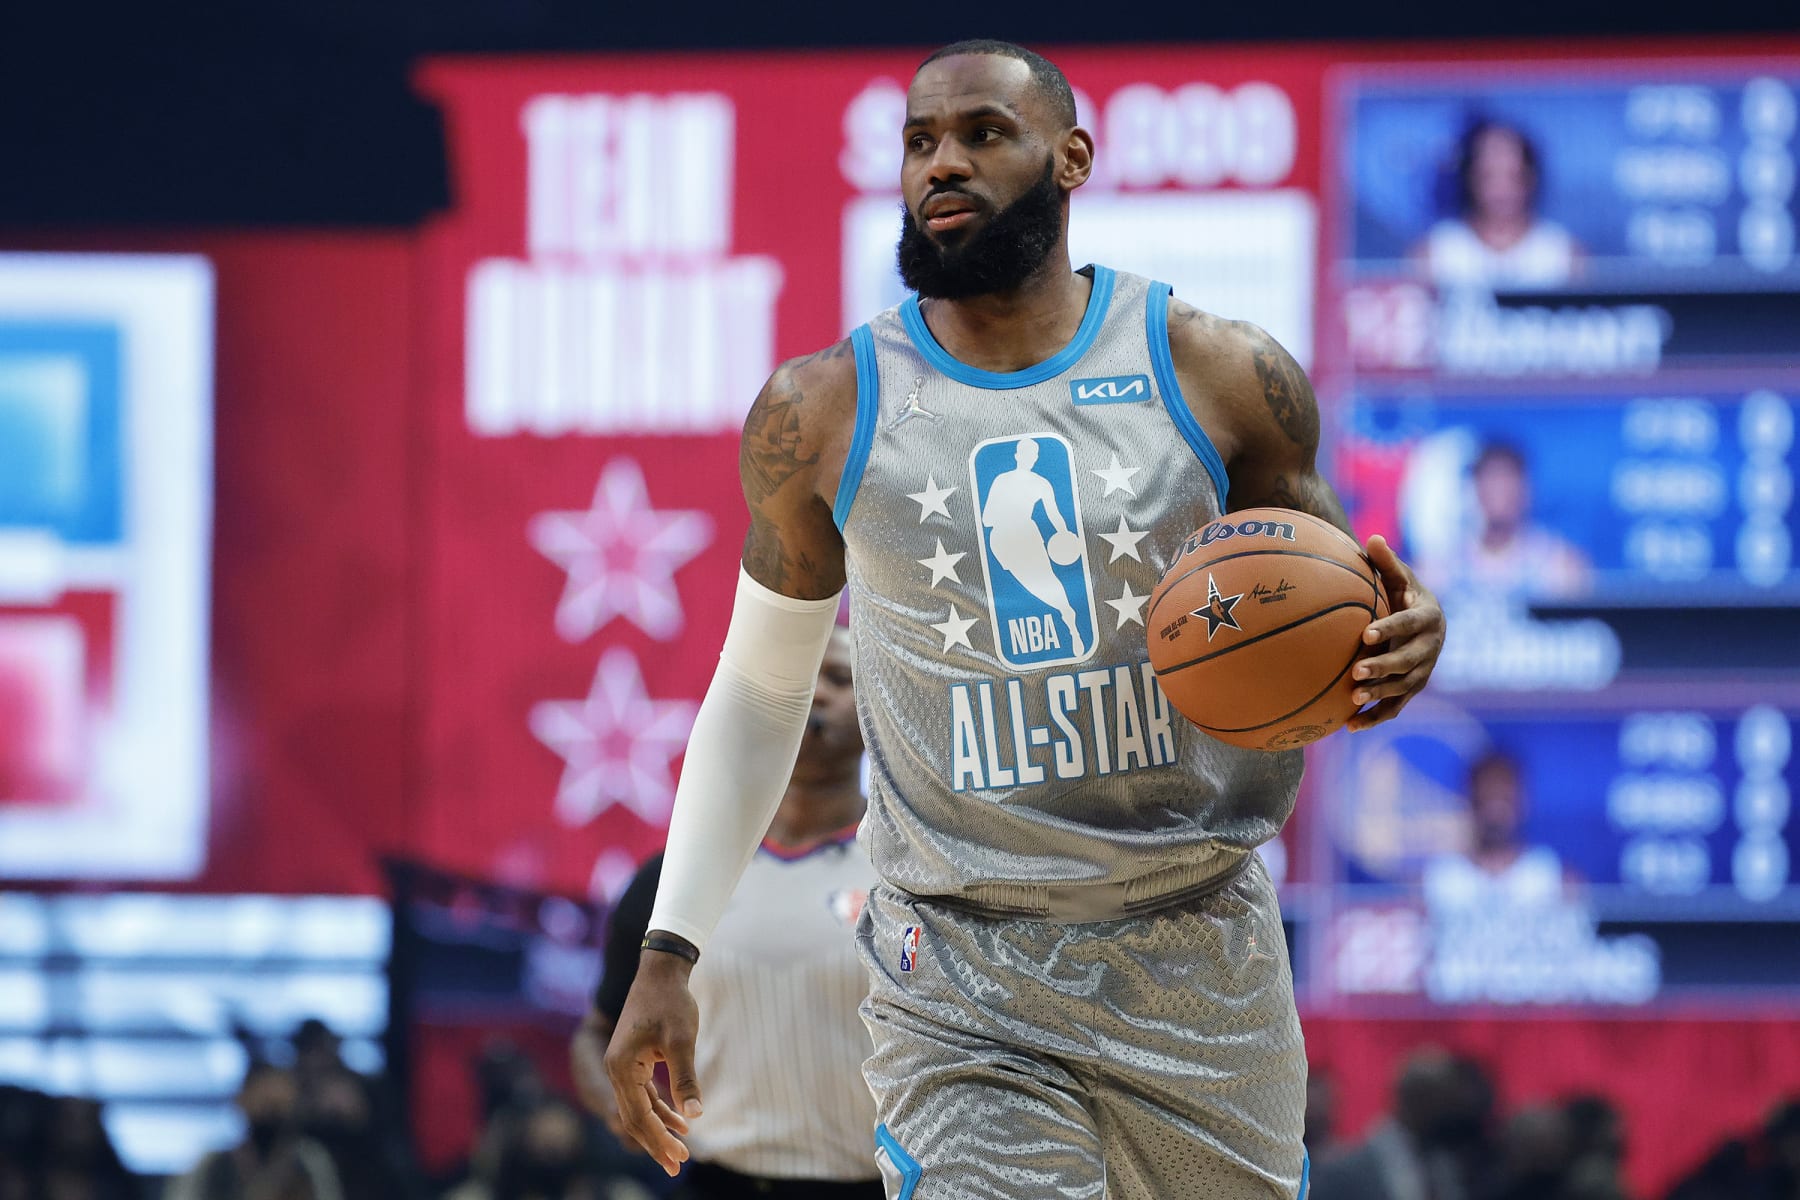 LeBron James is Top Vote-getter for 2010 NBA All-Star in Dallas